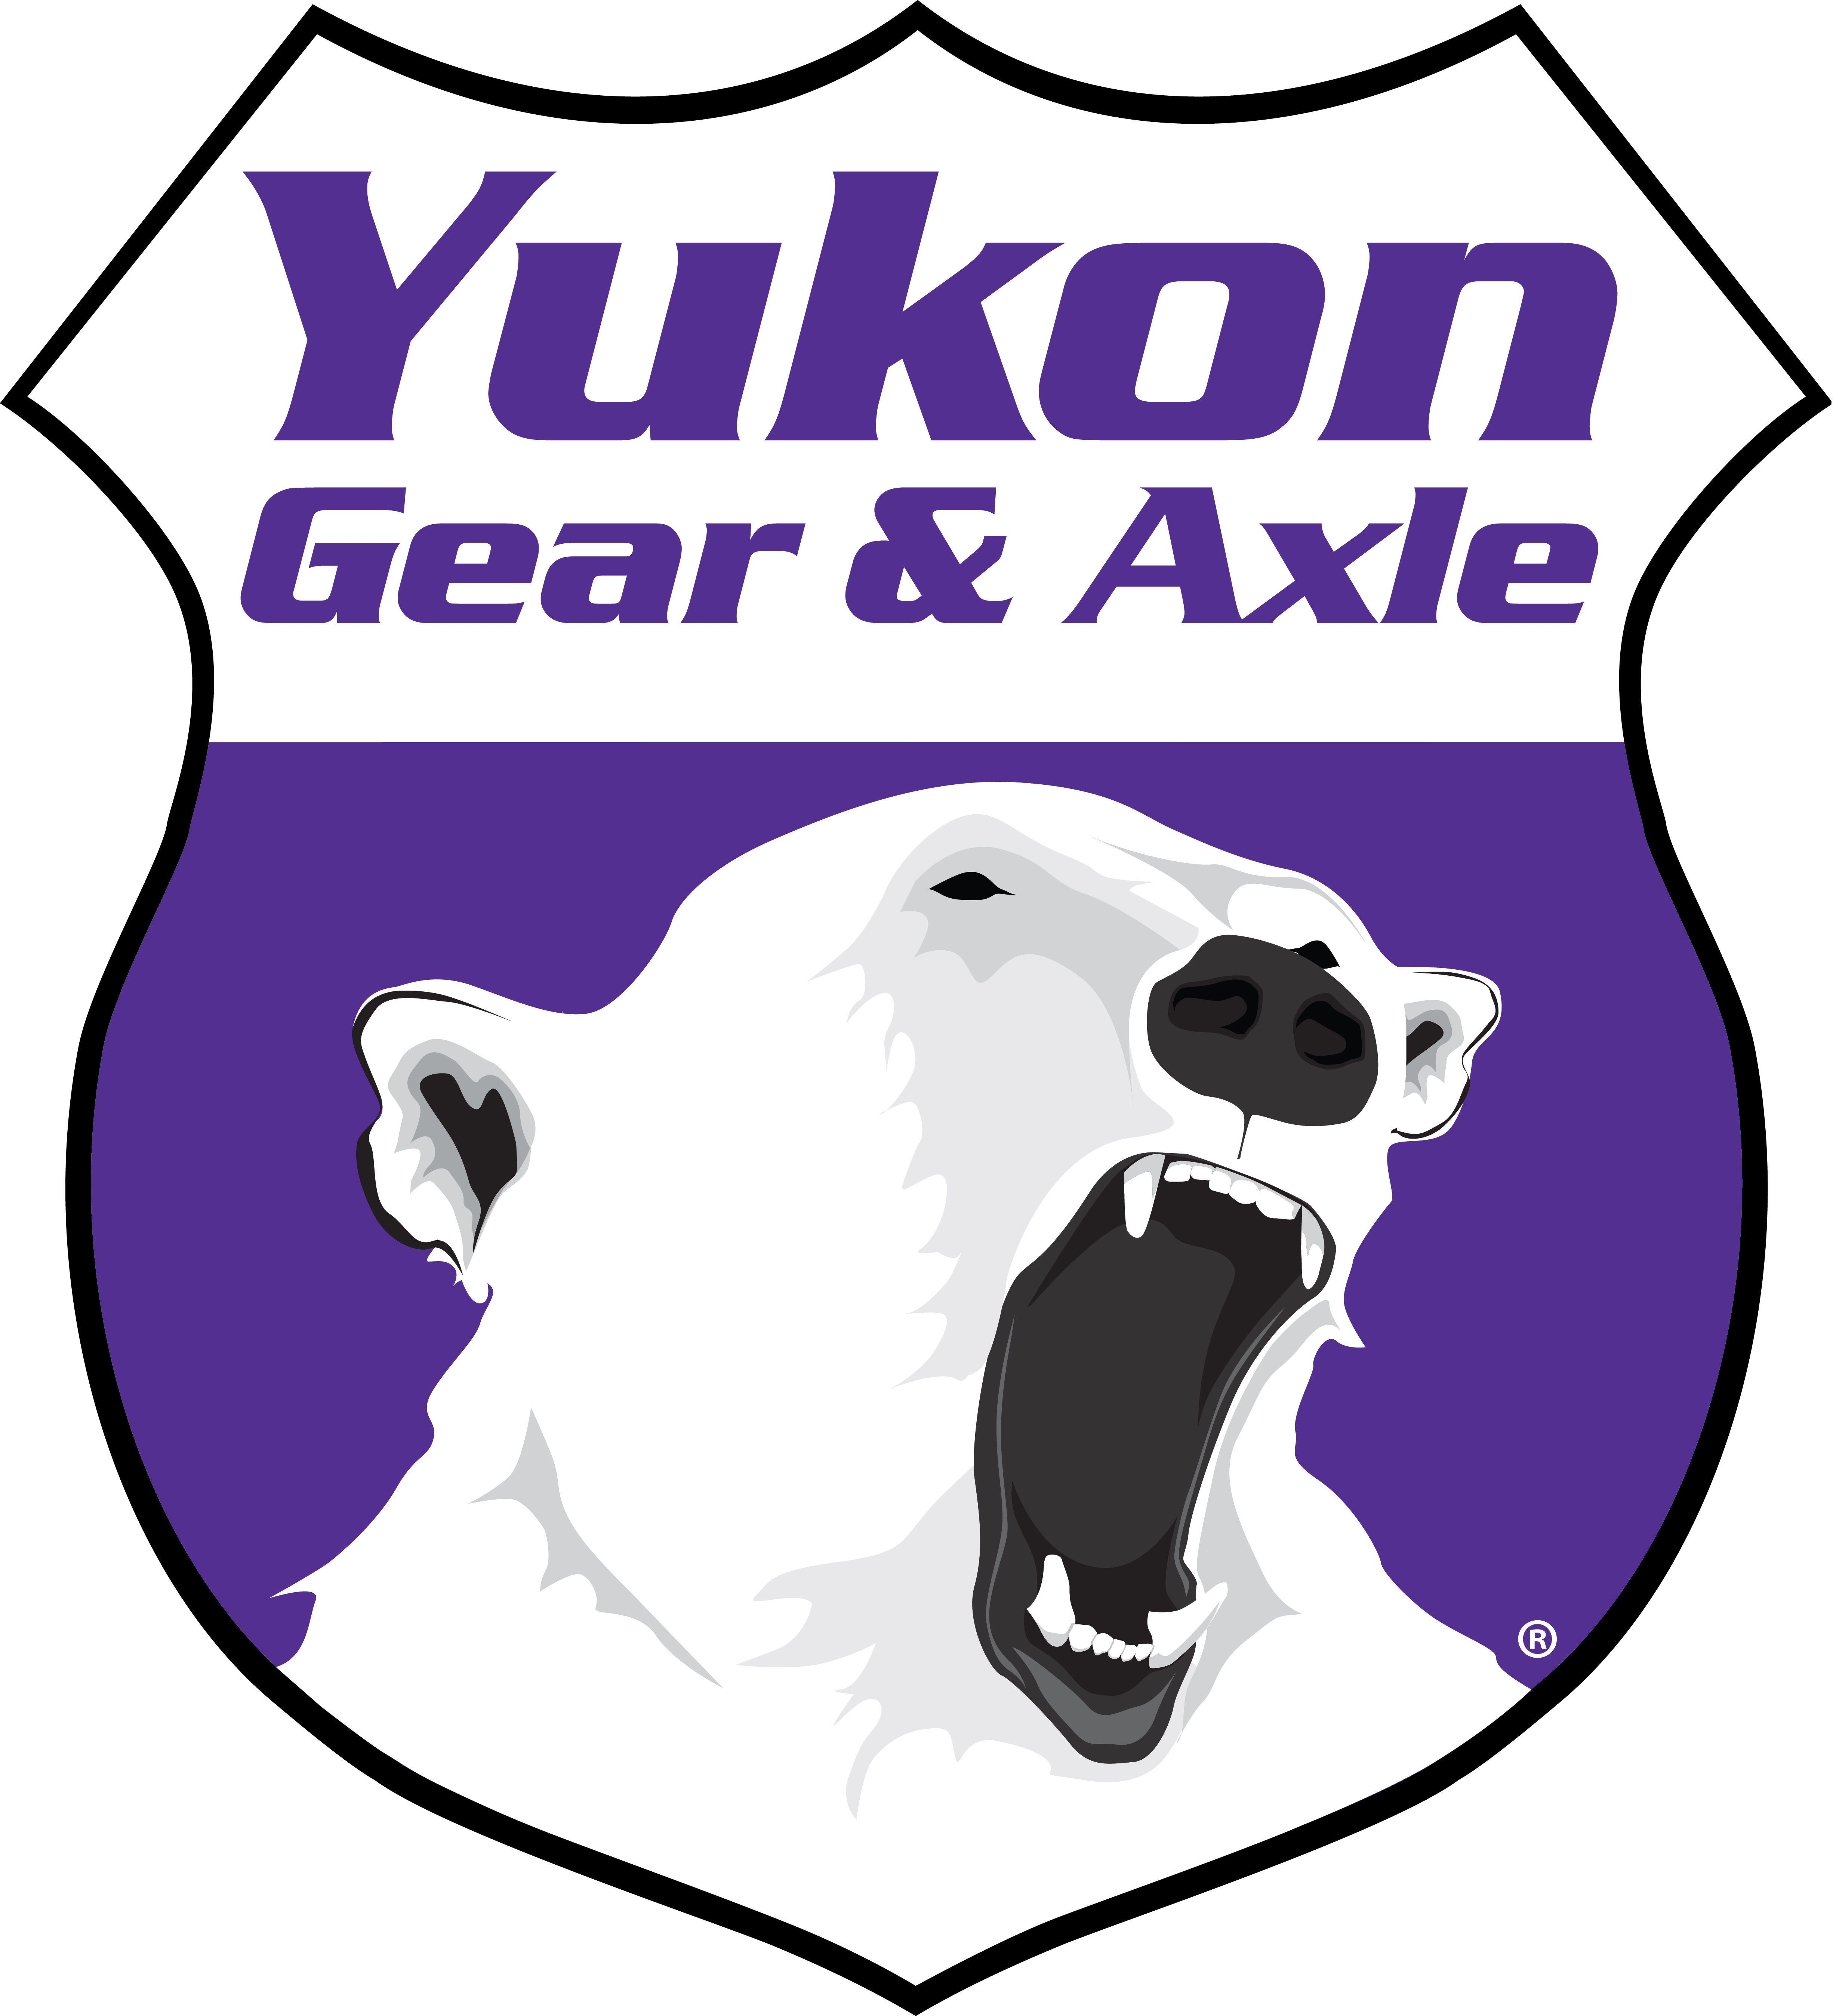 Yukon Pinion install kit for GM 7.75" differential 